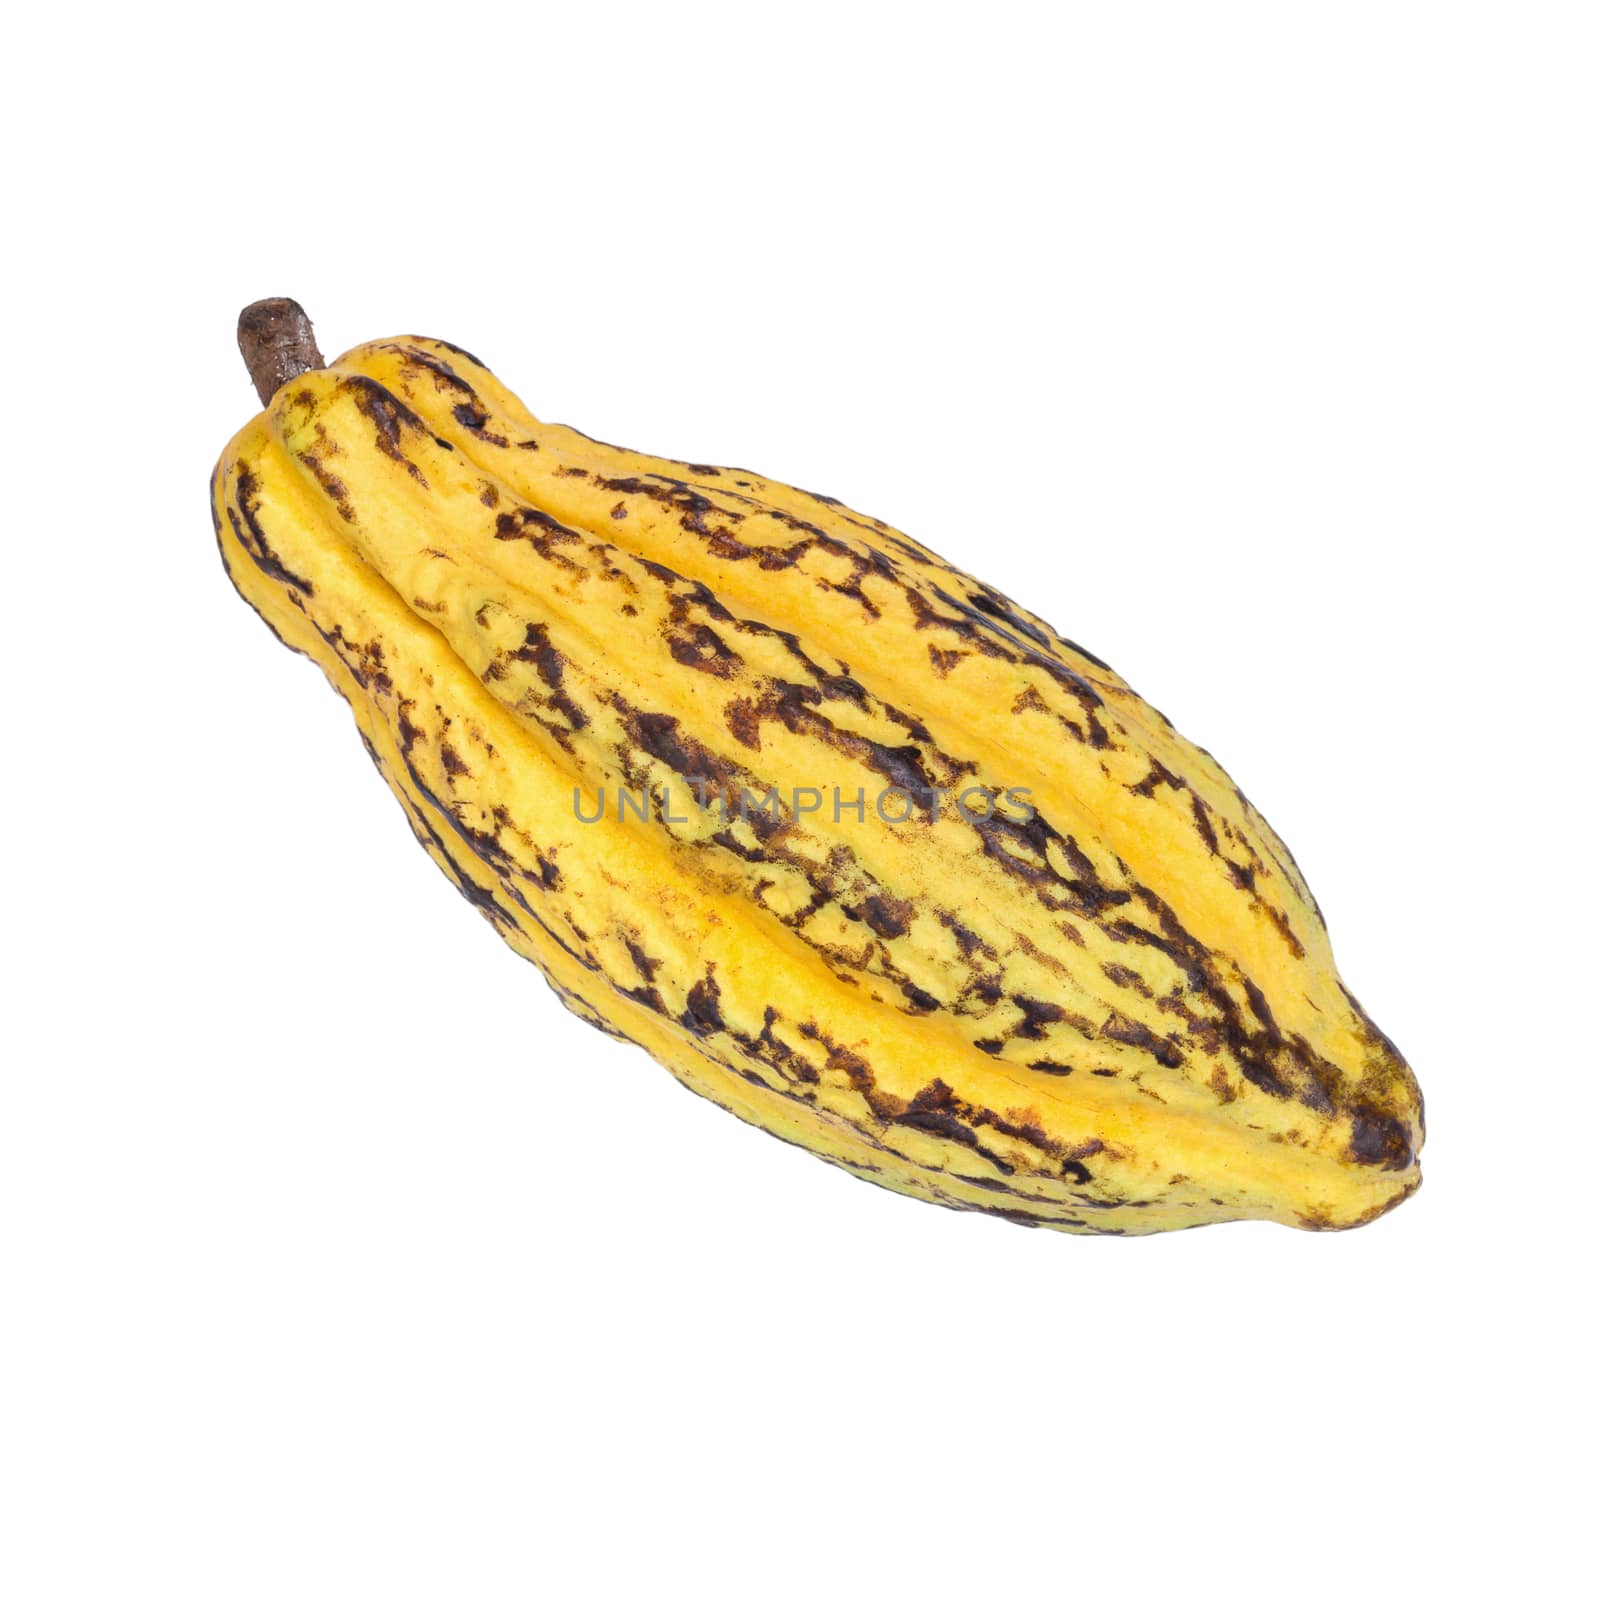 Cacao fruit, raw cacao beans, Cocoa pod isolated on white backgr by kaiskynet